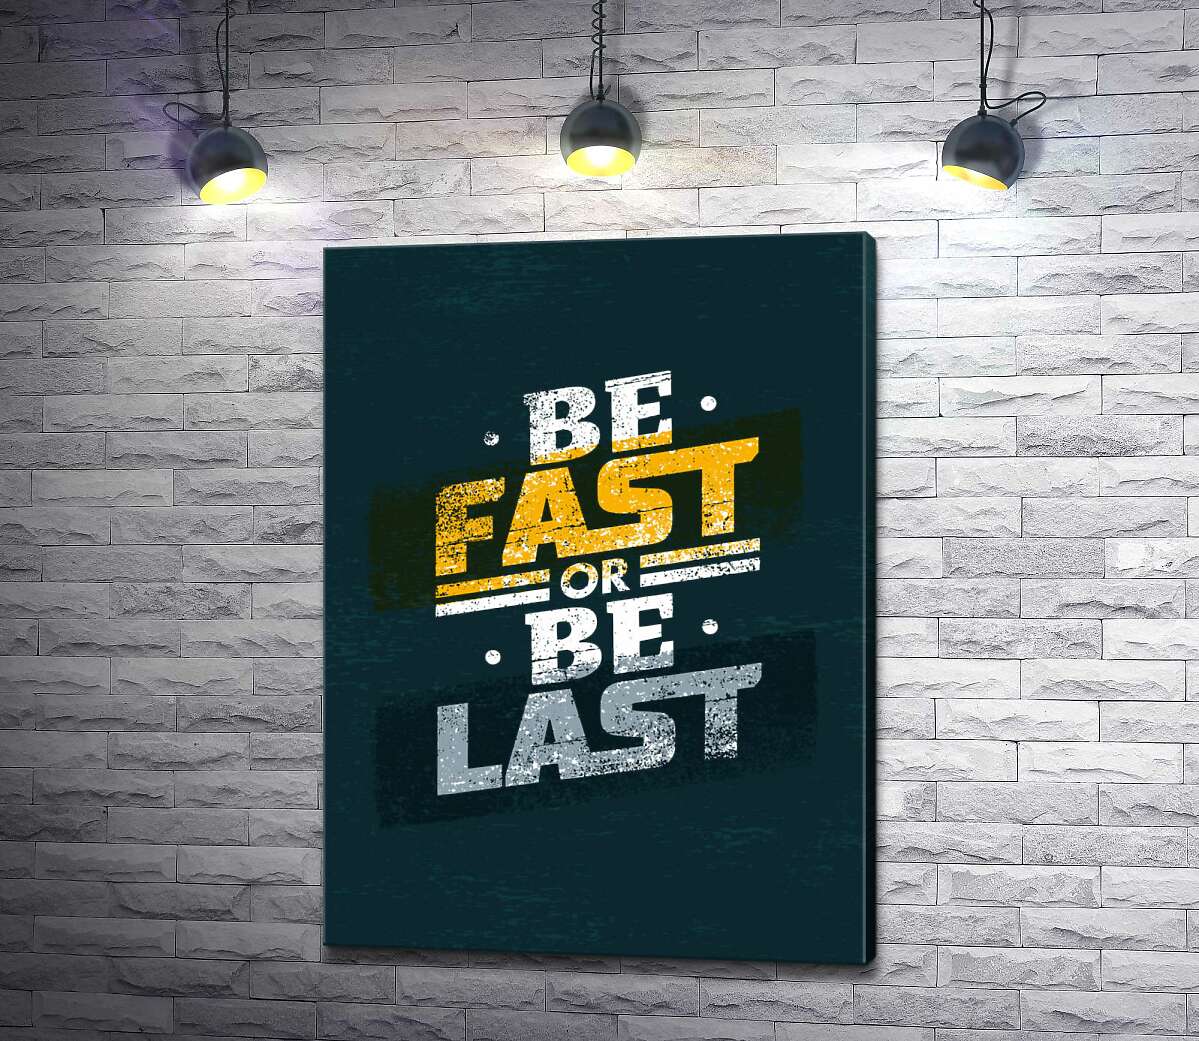 картина Вызов во фразе "be fast or be last"